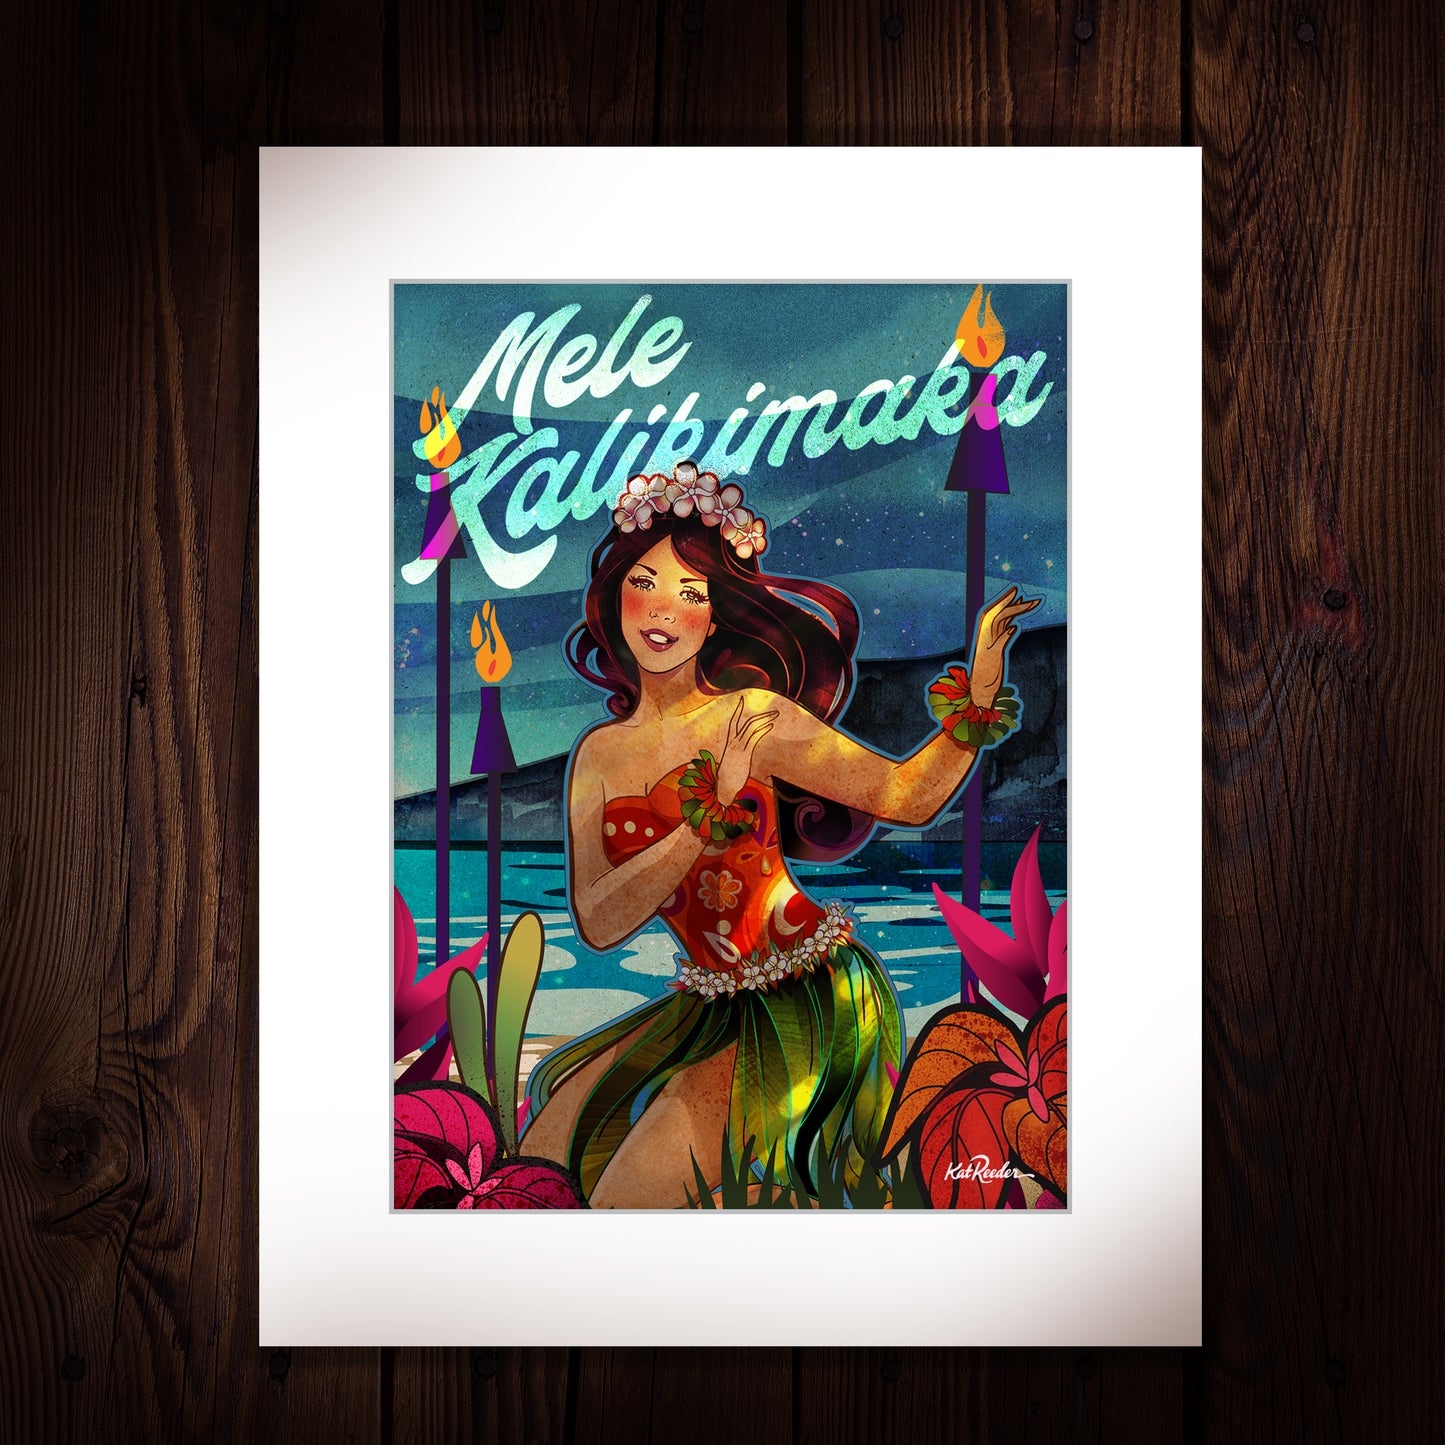 matted print of a christmas illustration featuring a hawaiian girl dancing hula at the beach at night surrounded by tiki torches and big red poinsettia flowers. The image reads "Mele Kalikimaka"